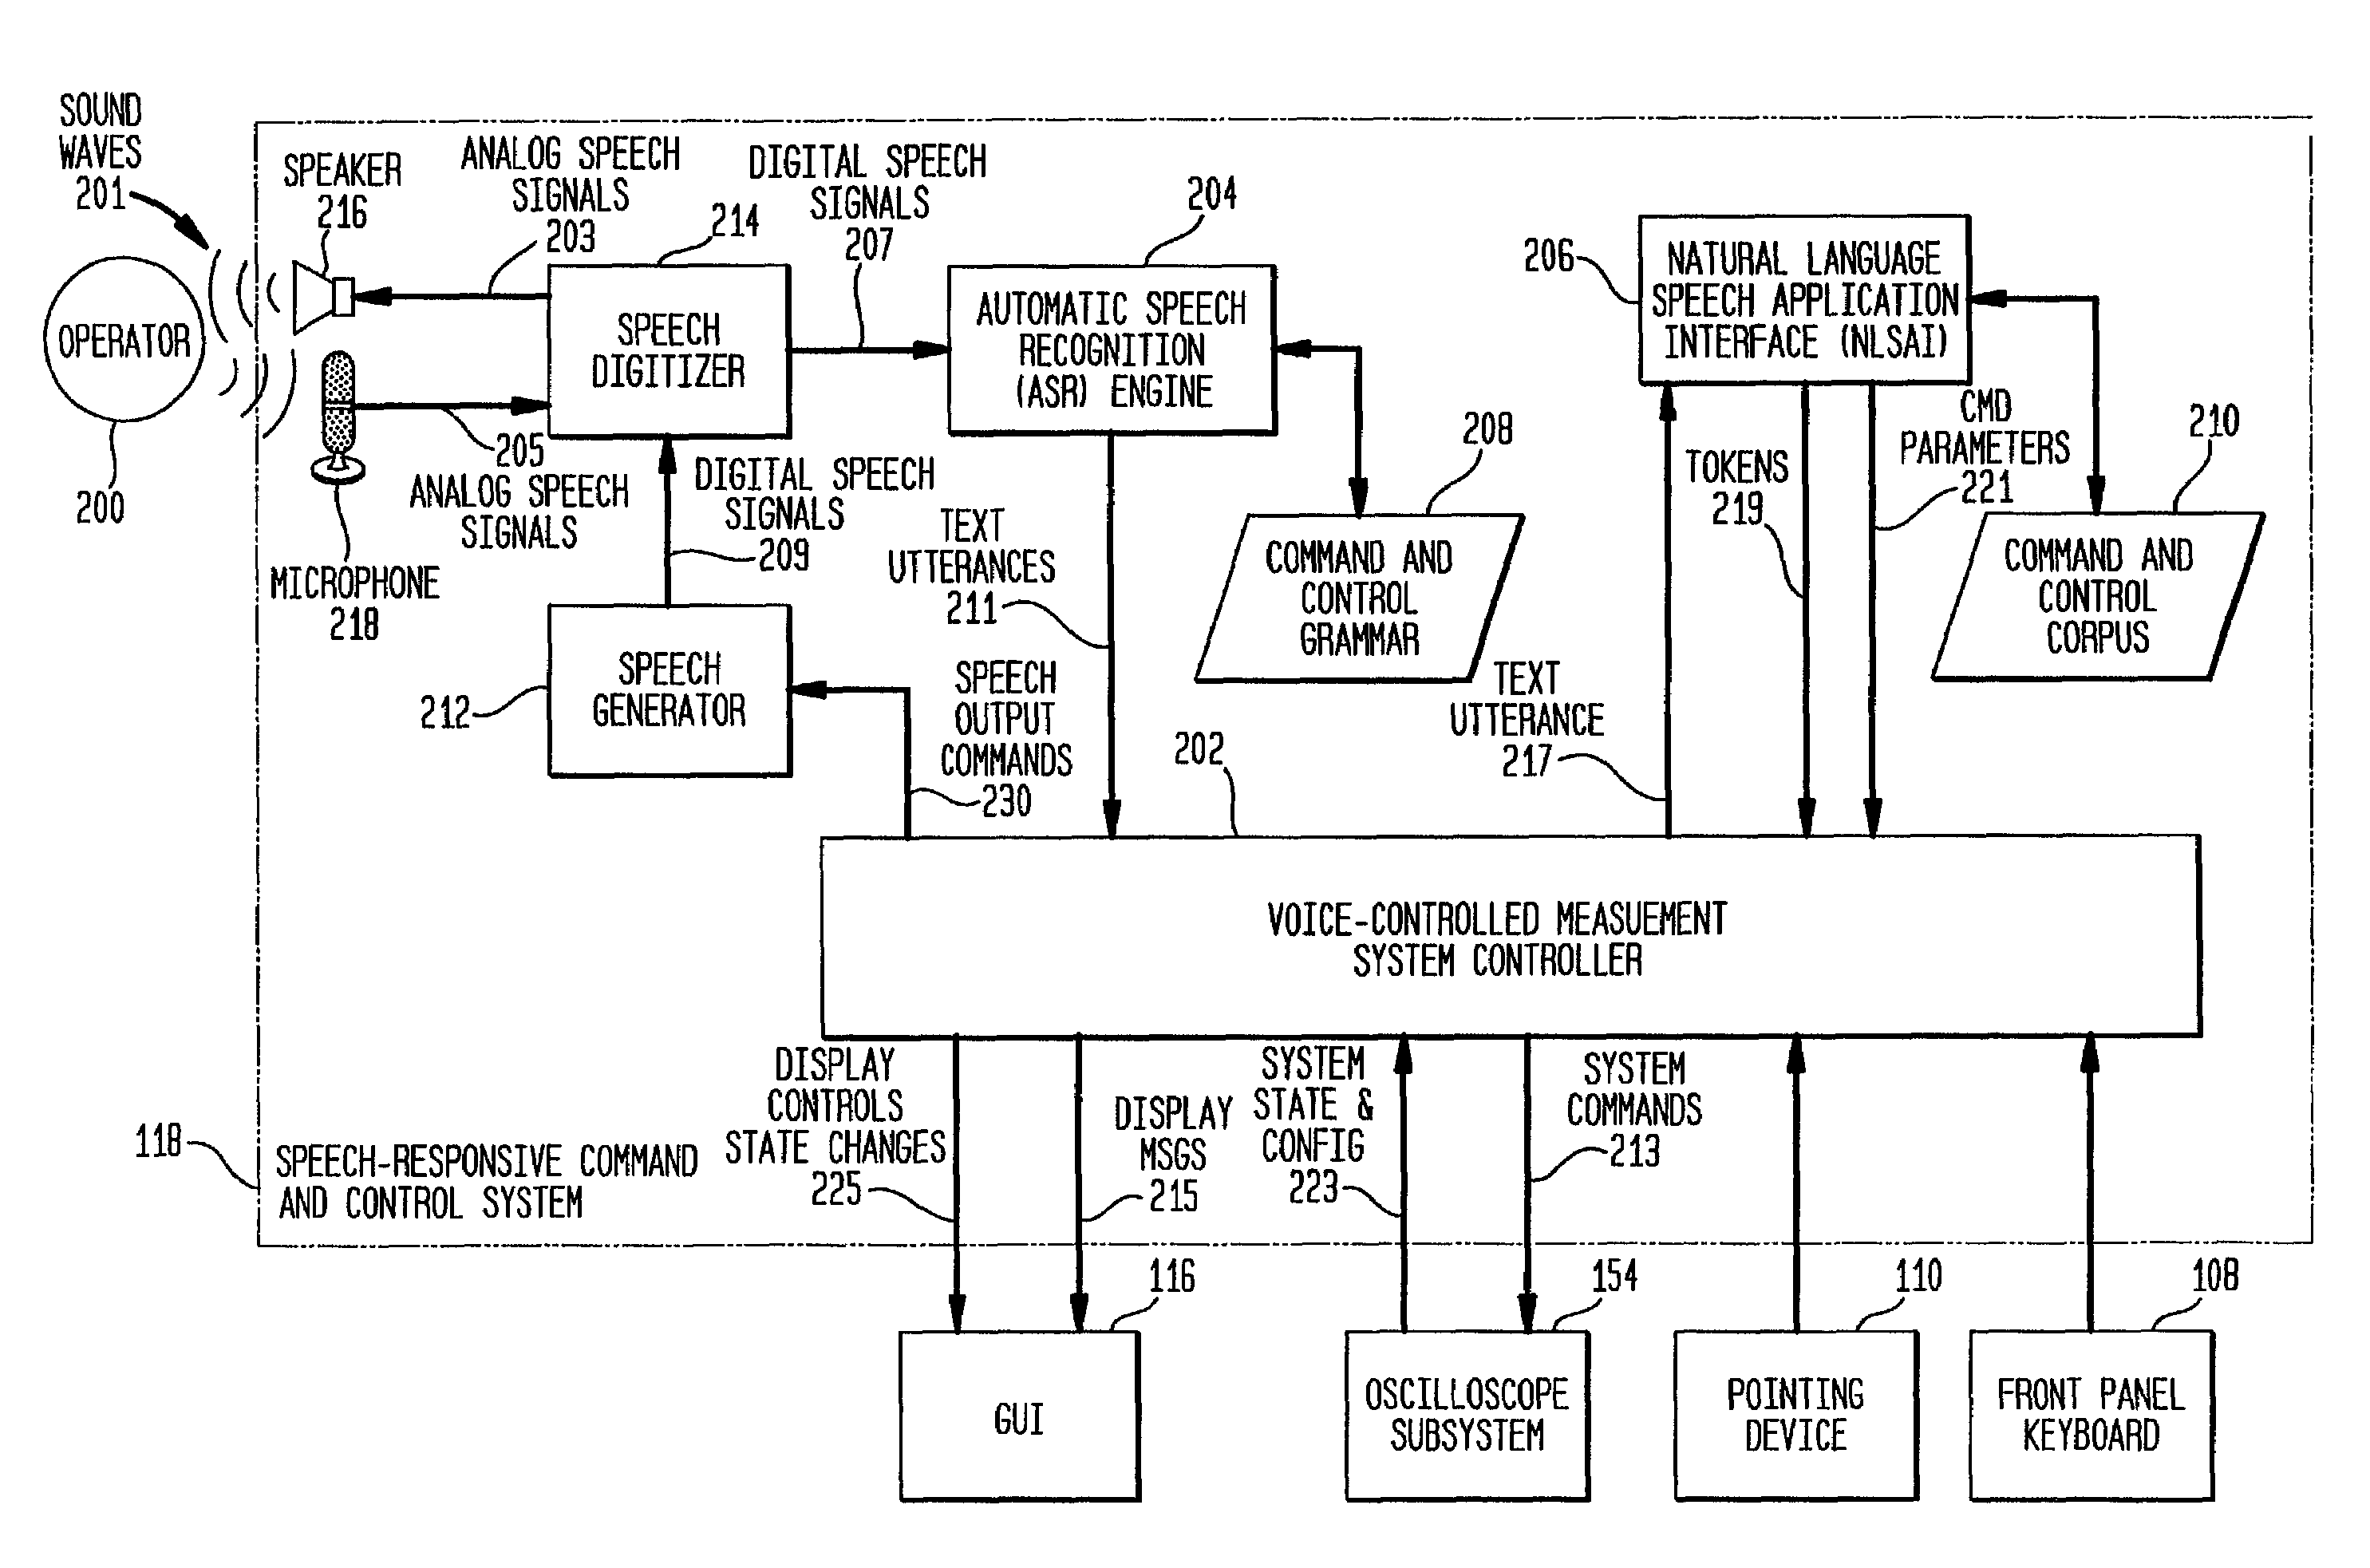 Voice-responsive command and control system and methodology for use in a signal measurement system